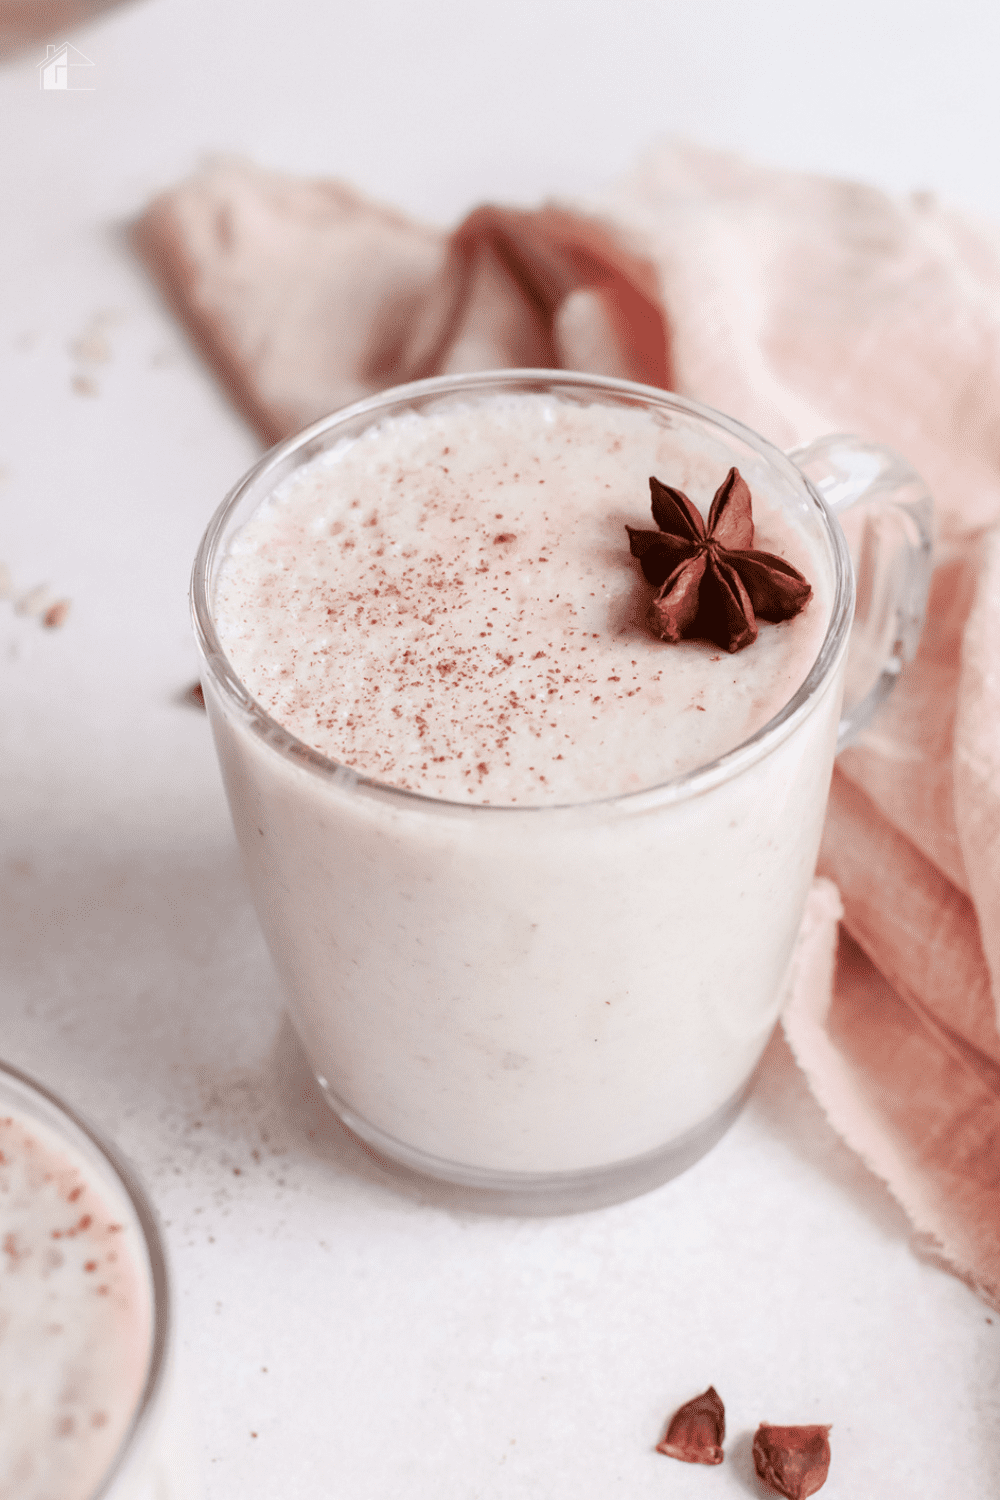 Atole de Avena is a comforting hot oatmeal drink recipe made with oats, milk, water, sugar, and cinnamon. via @mystayathome